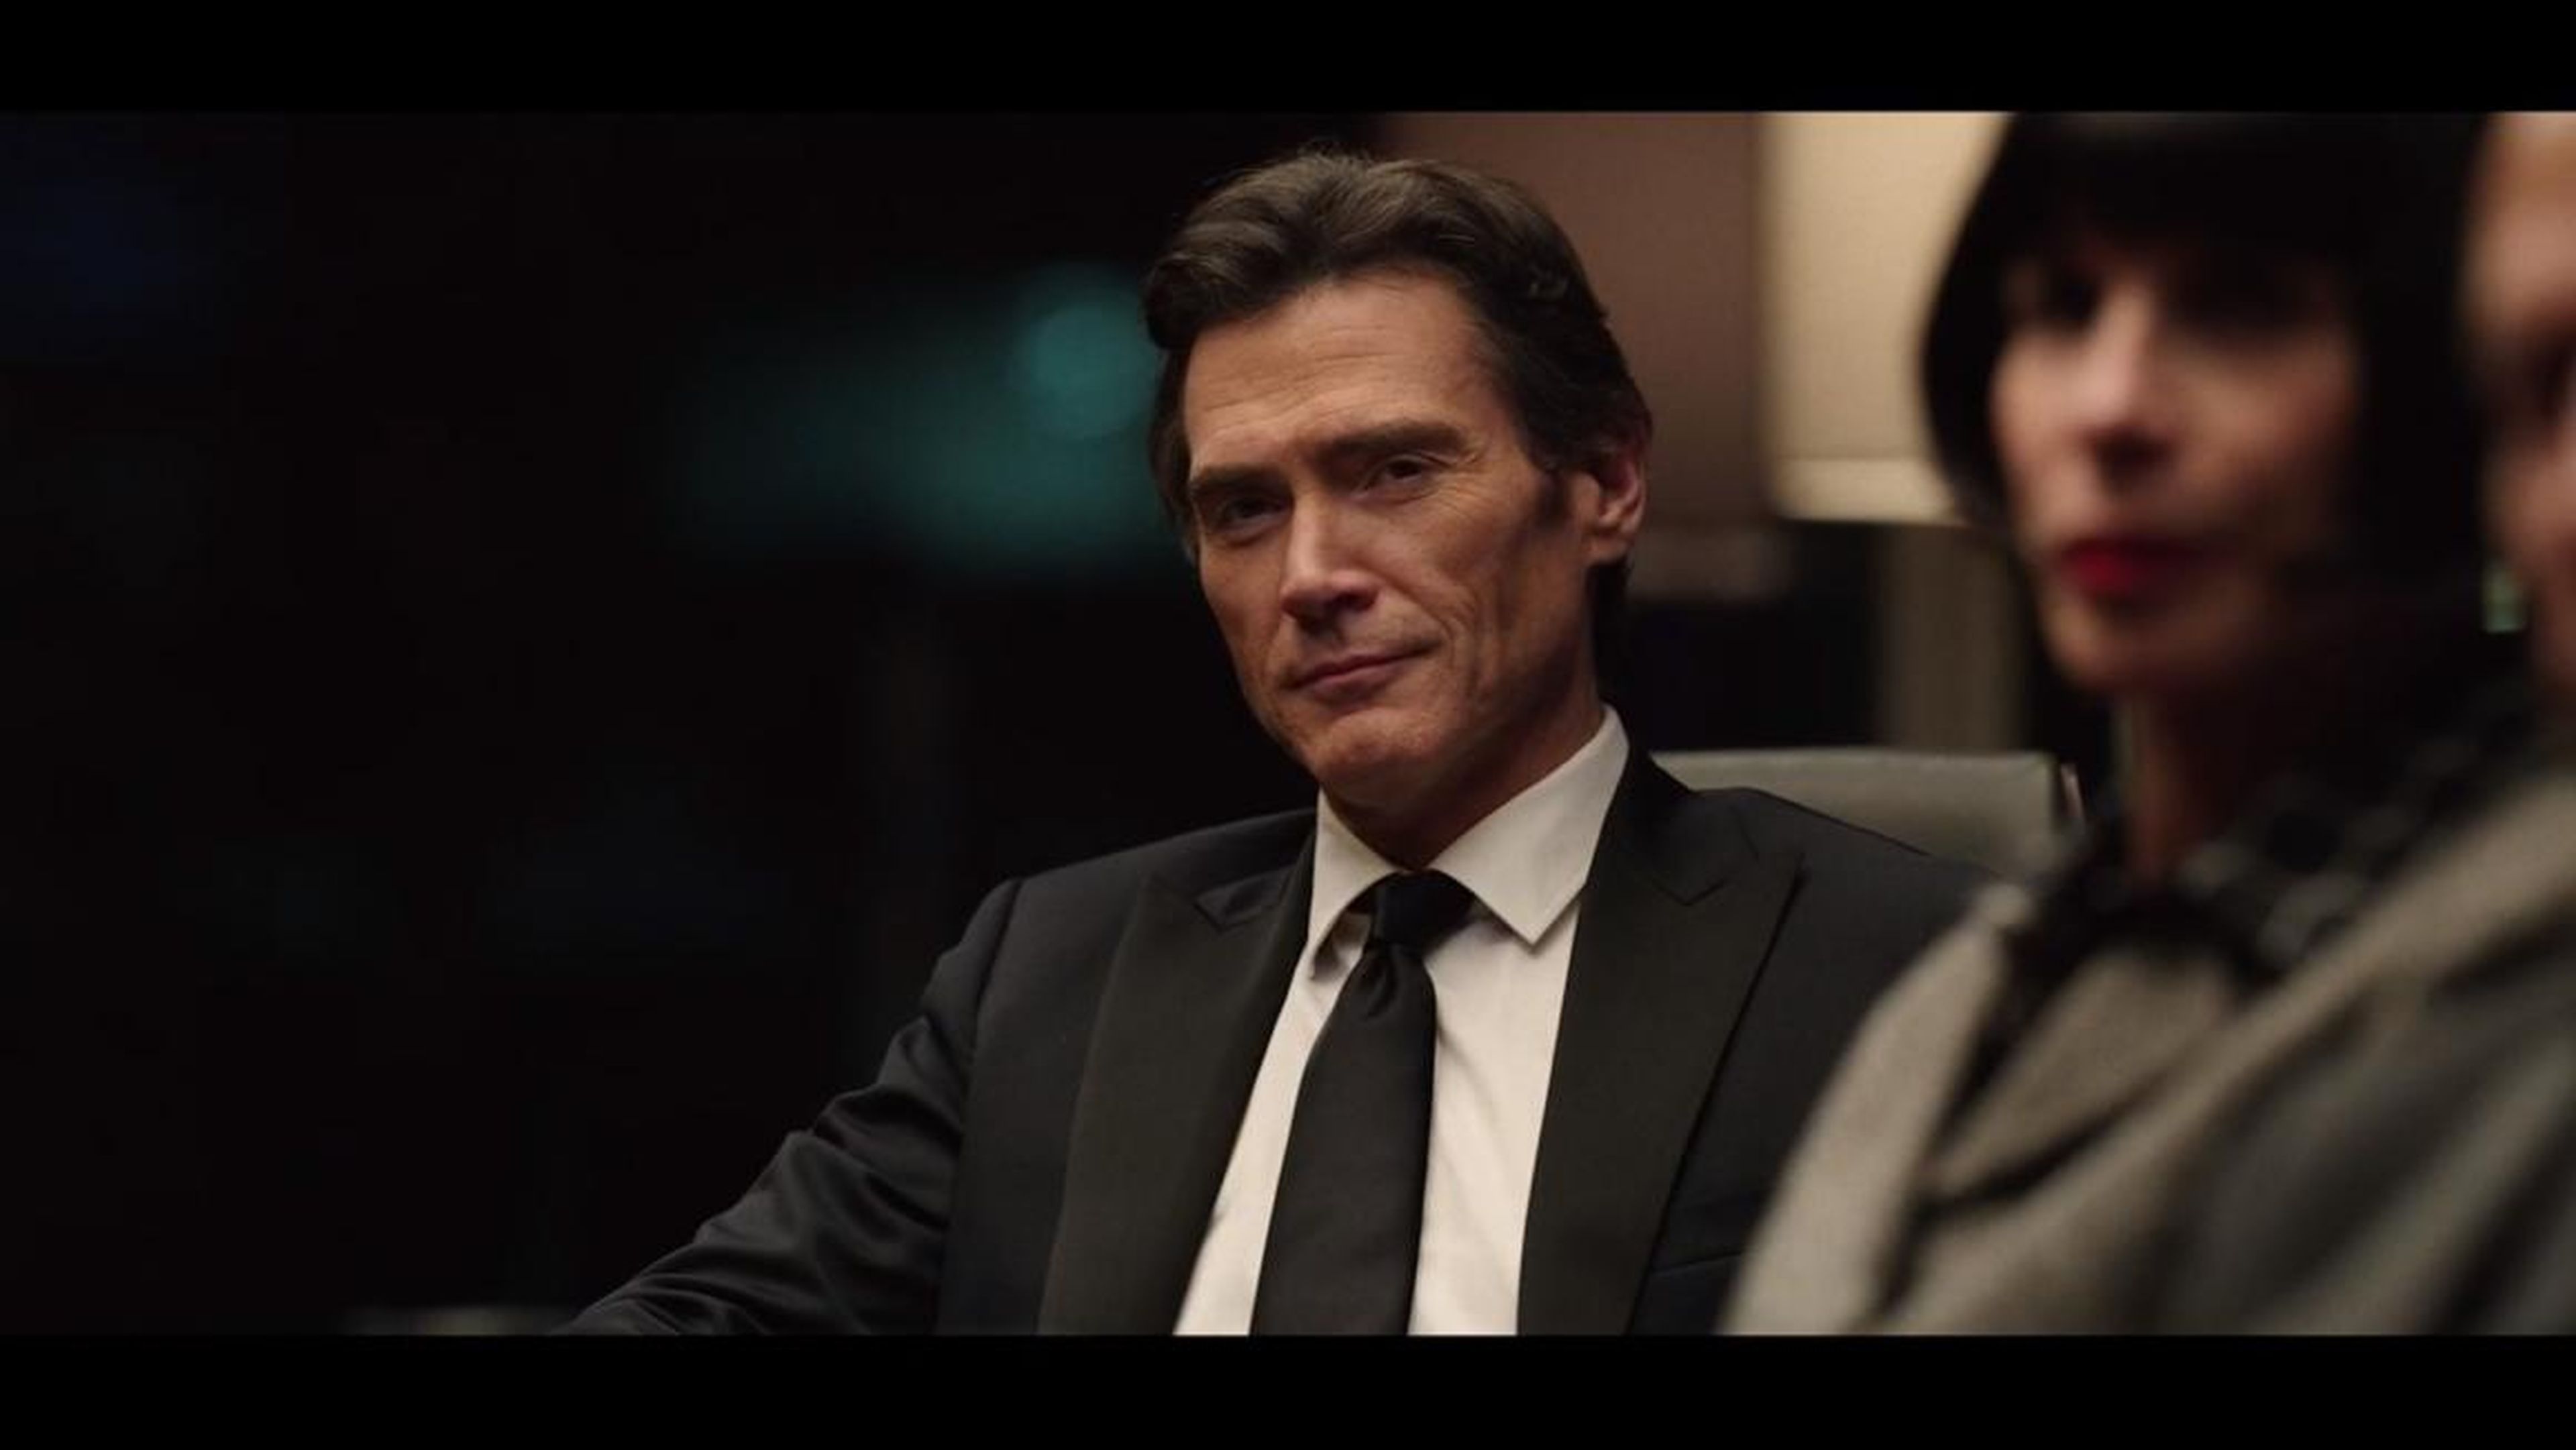 Billy Crudup will also appear in "The Morning Show."